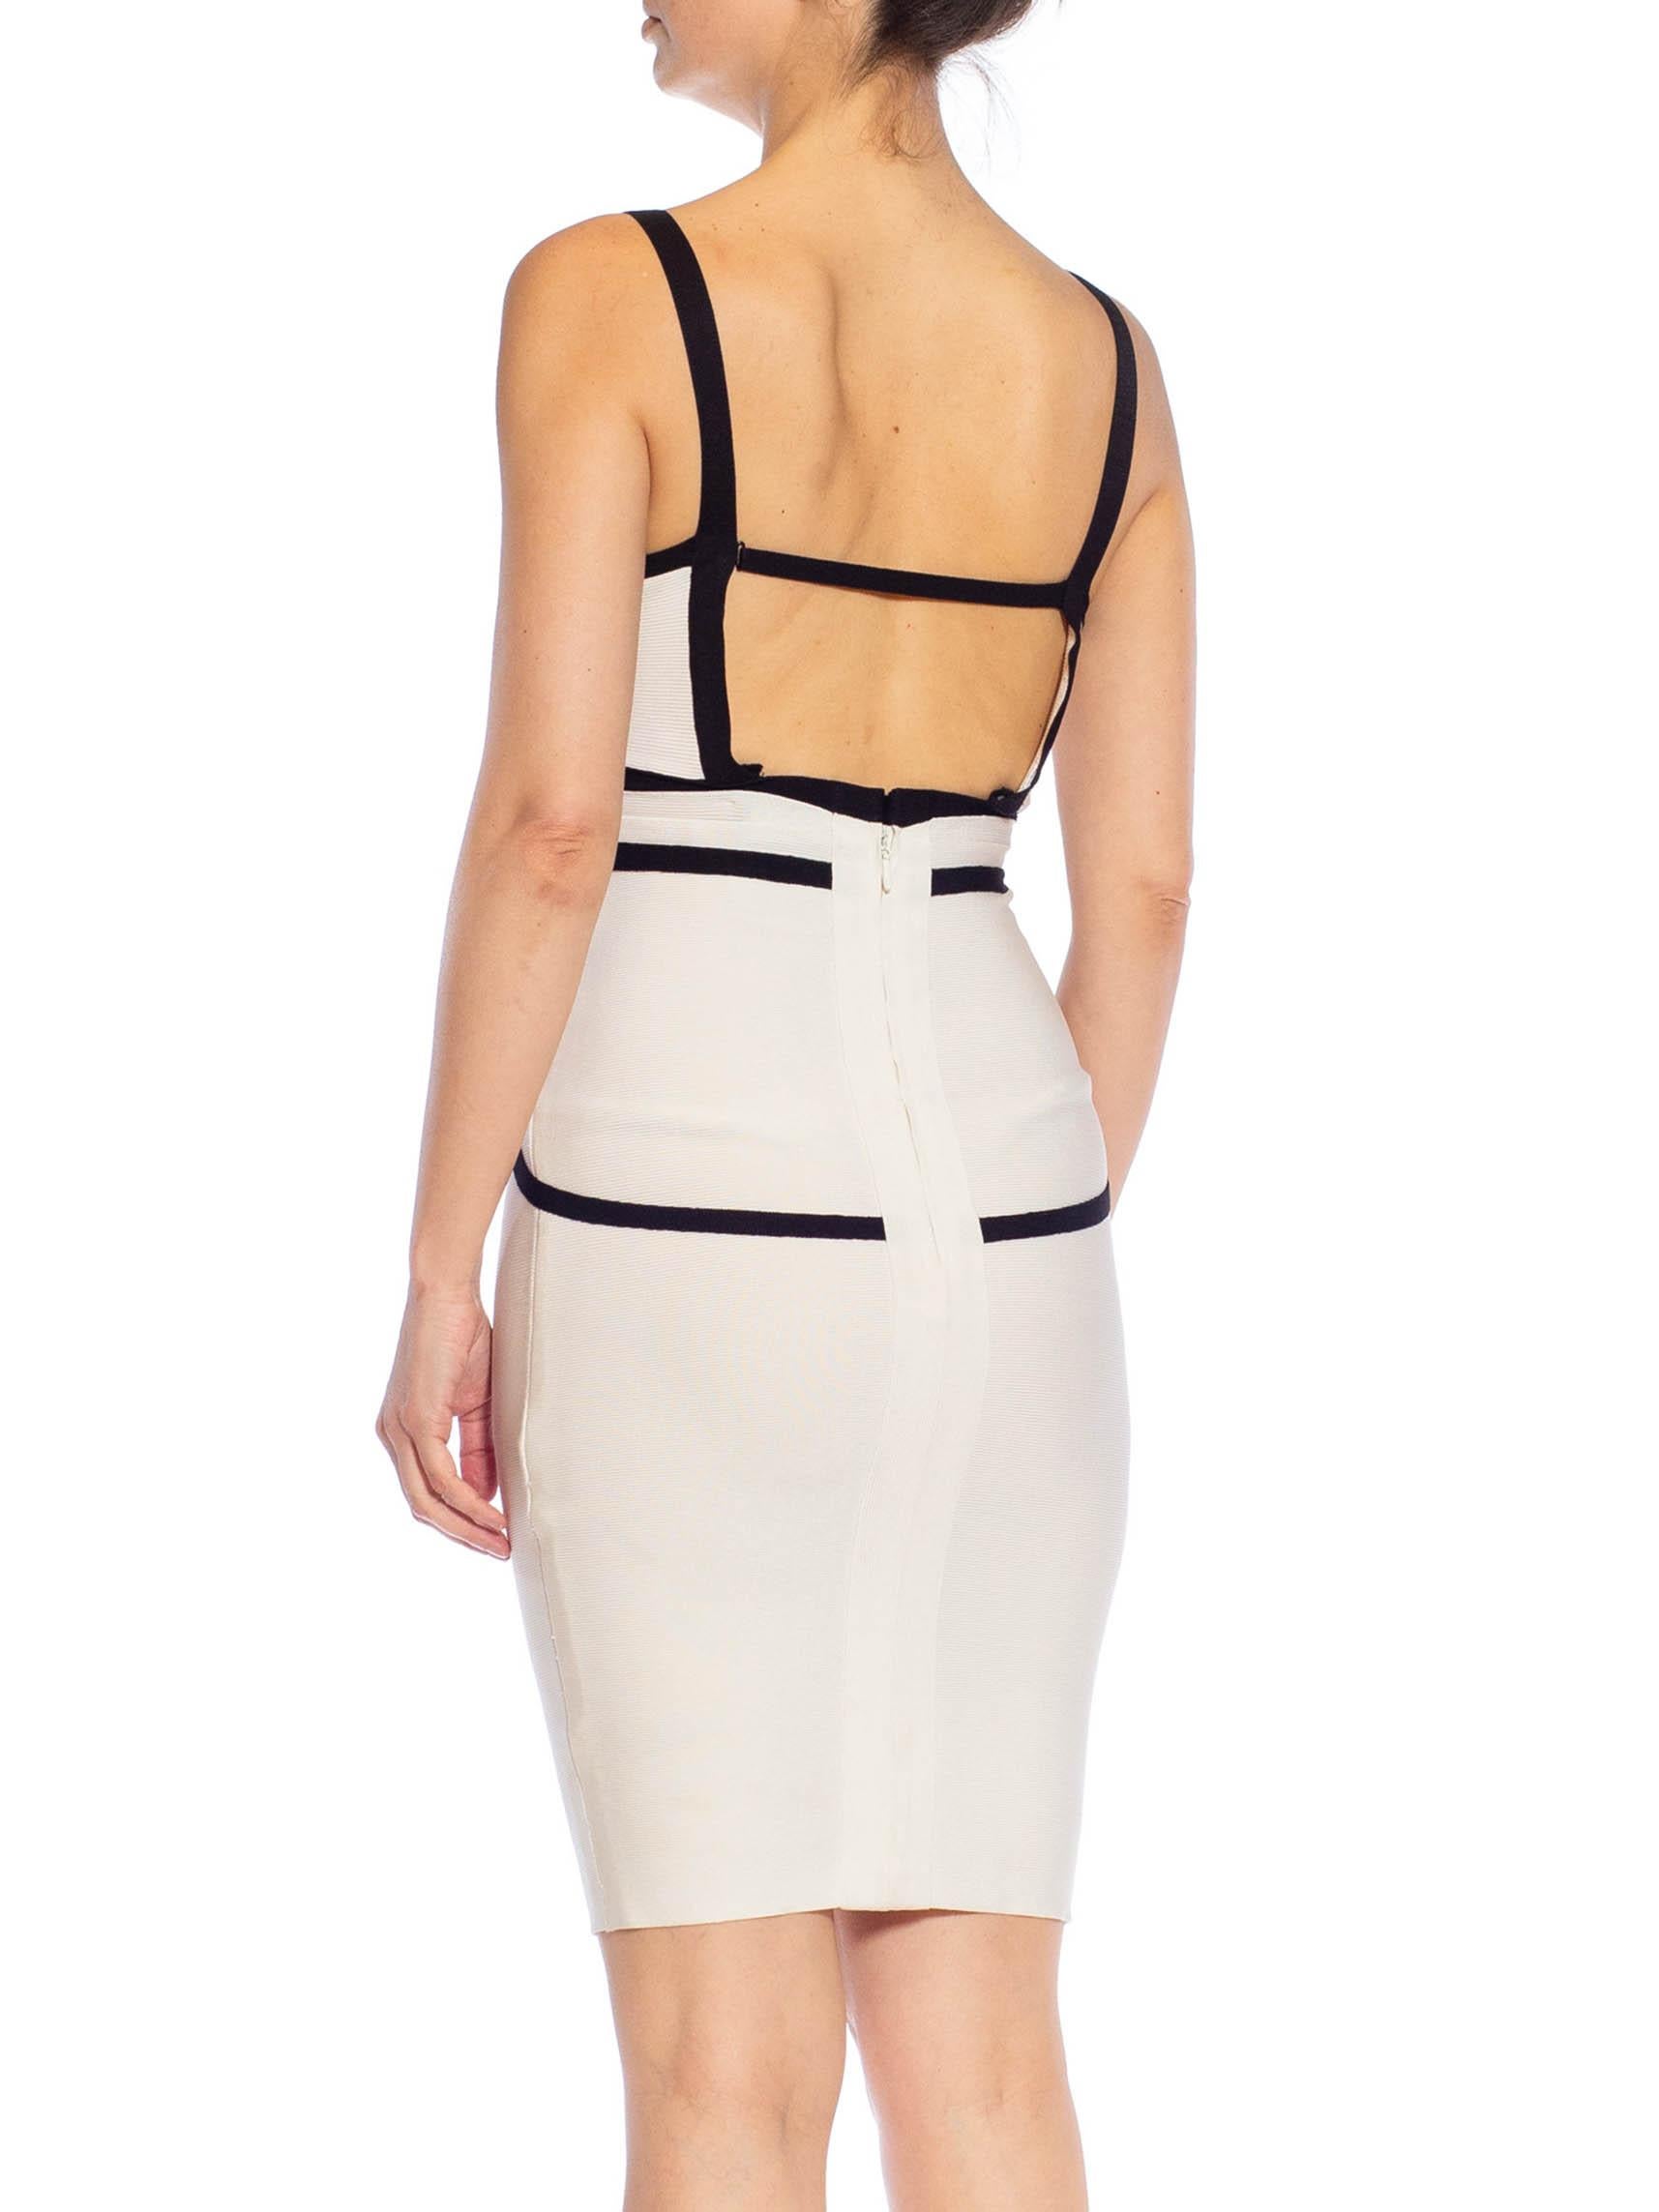 2000S HERVE LEGER Black & White Rayon Lycra Body-Con Dress In Excellent Condition For Sale In New York, NY